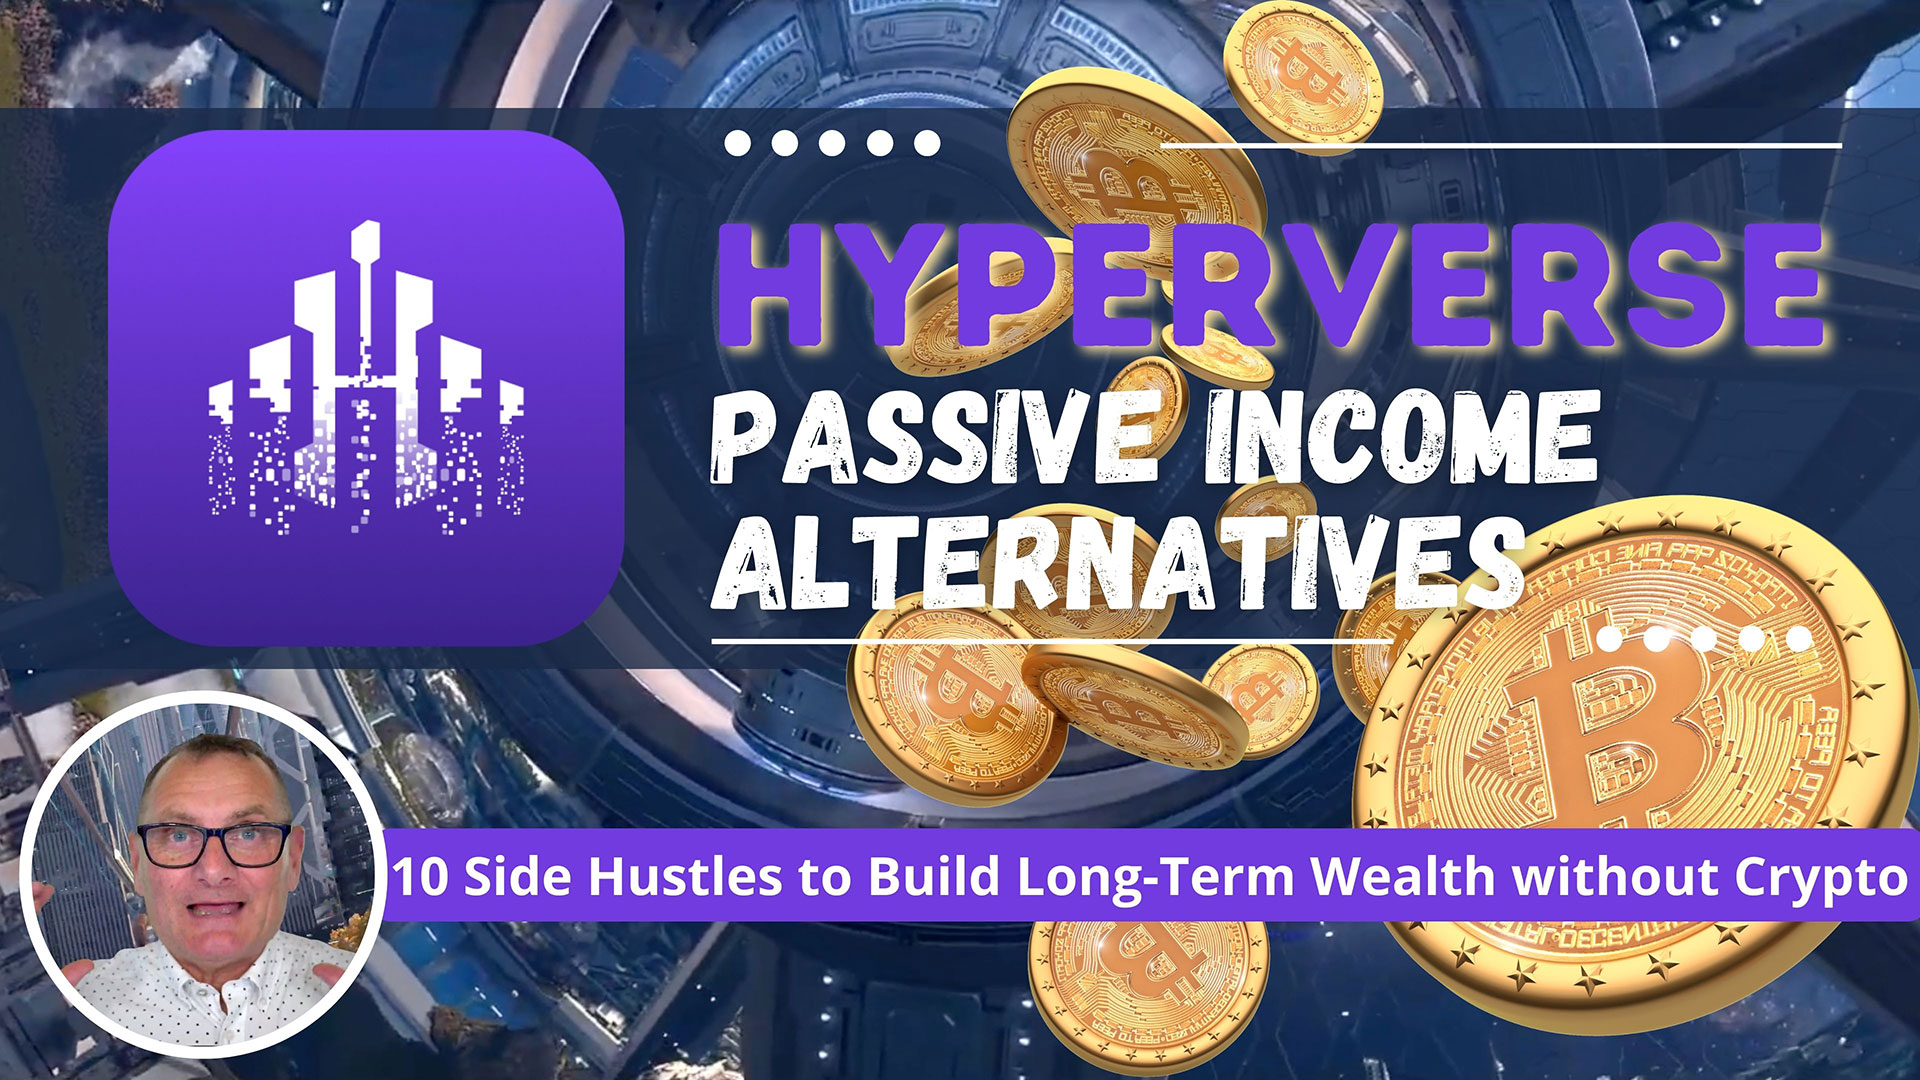 HyperVerse Passive Income Alternatives 10 Side Hustles to Build Long Term Wealth without Cryptonbsp› Entrepreneur Decision Maker Connector Podcaster Educator